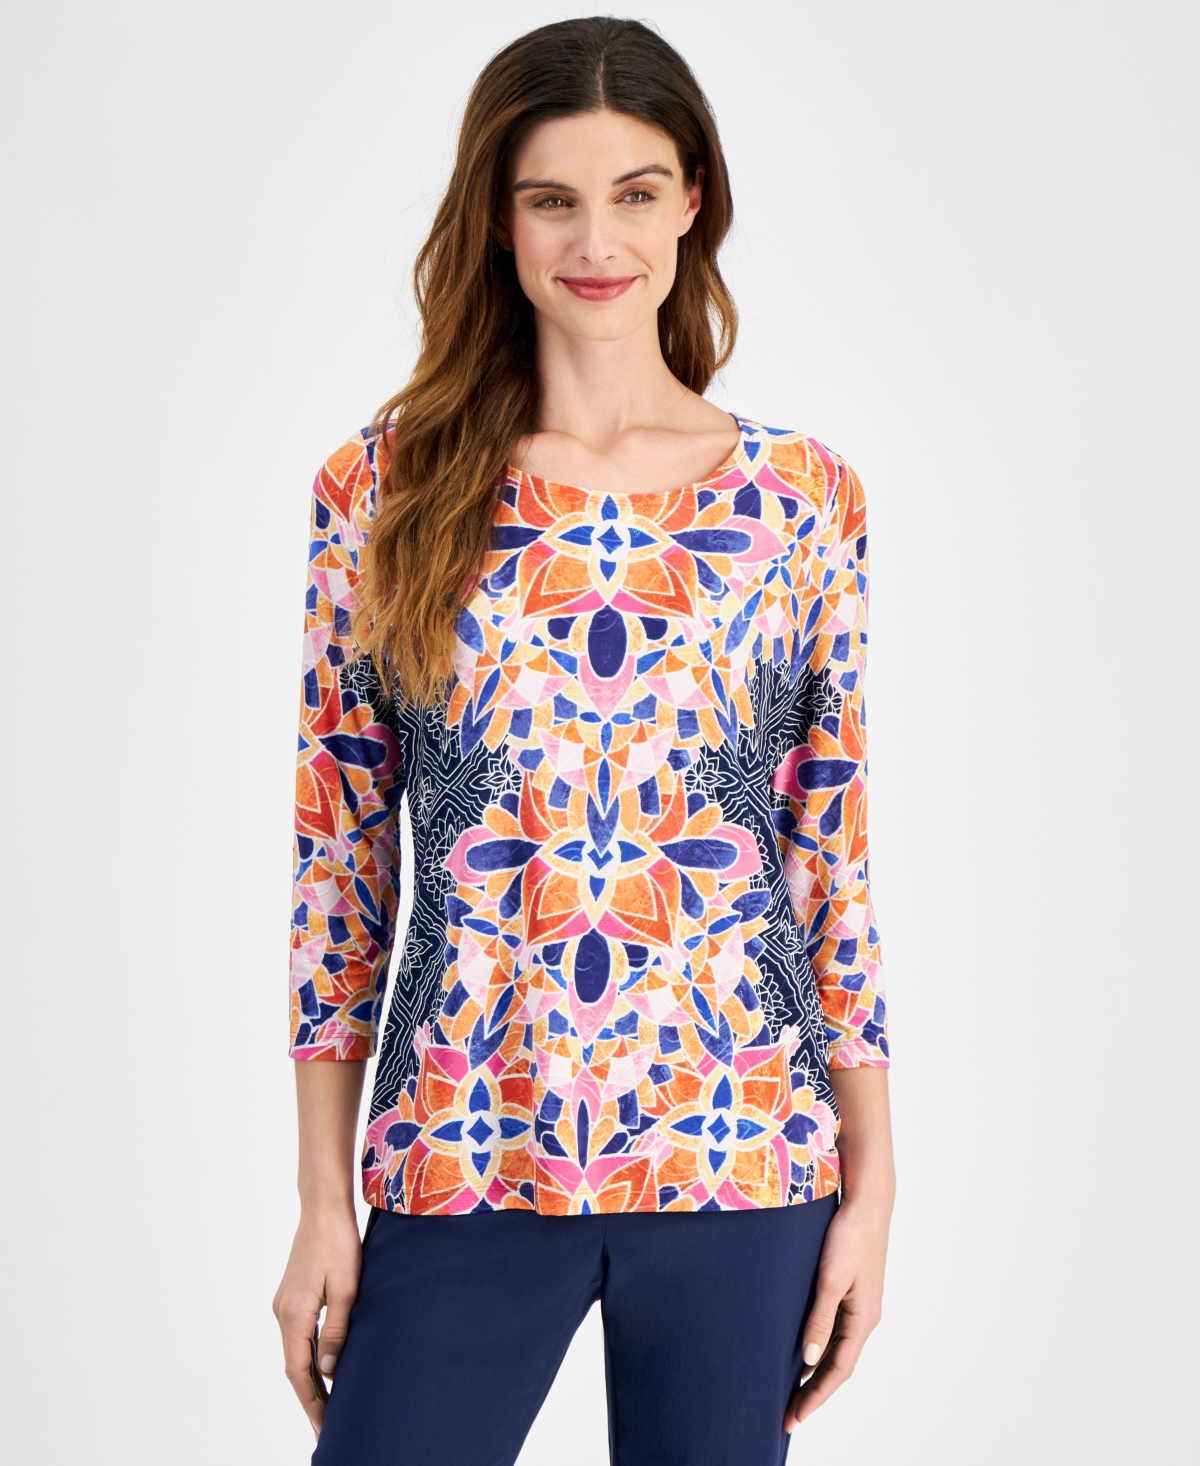 Women's Printed 3/4 Sleeve Jacquard Top, Created for Macy's - Intrepid Blue Combo